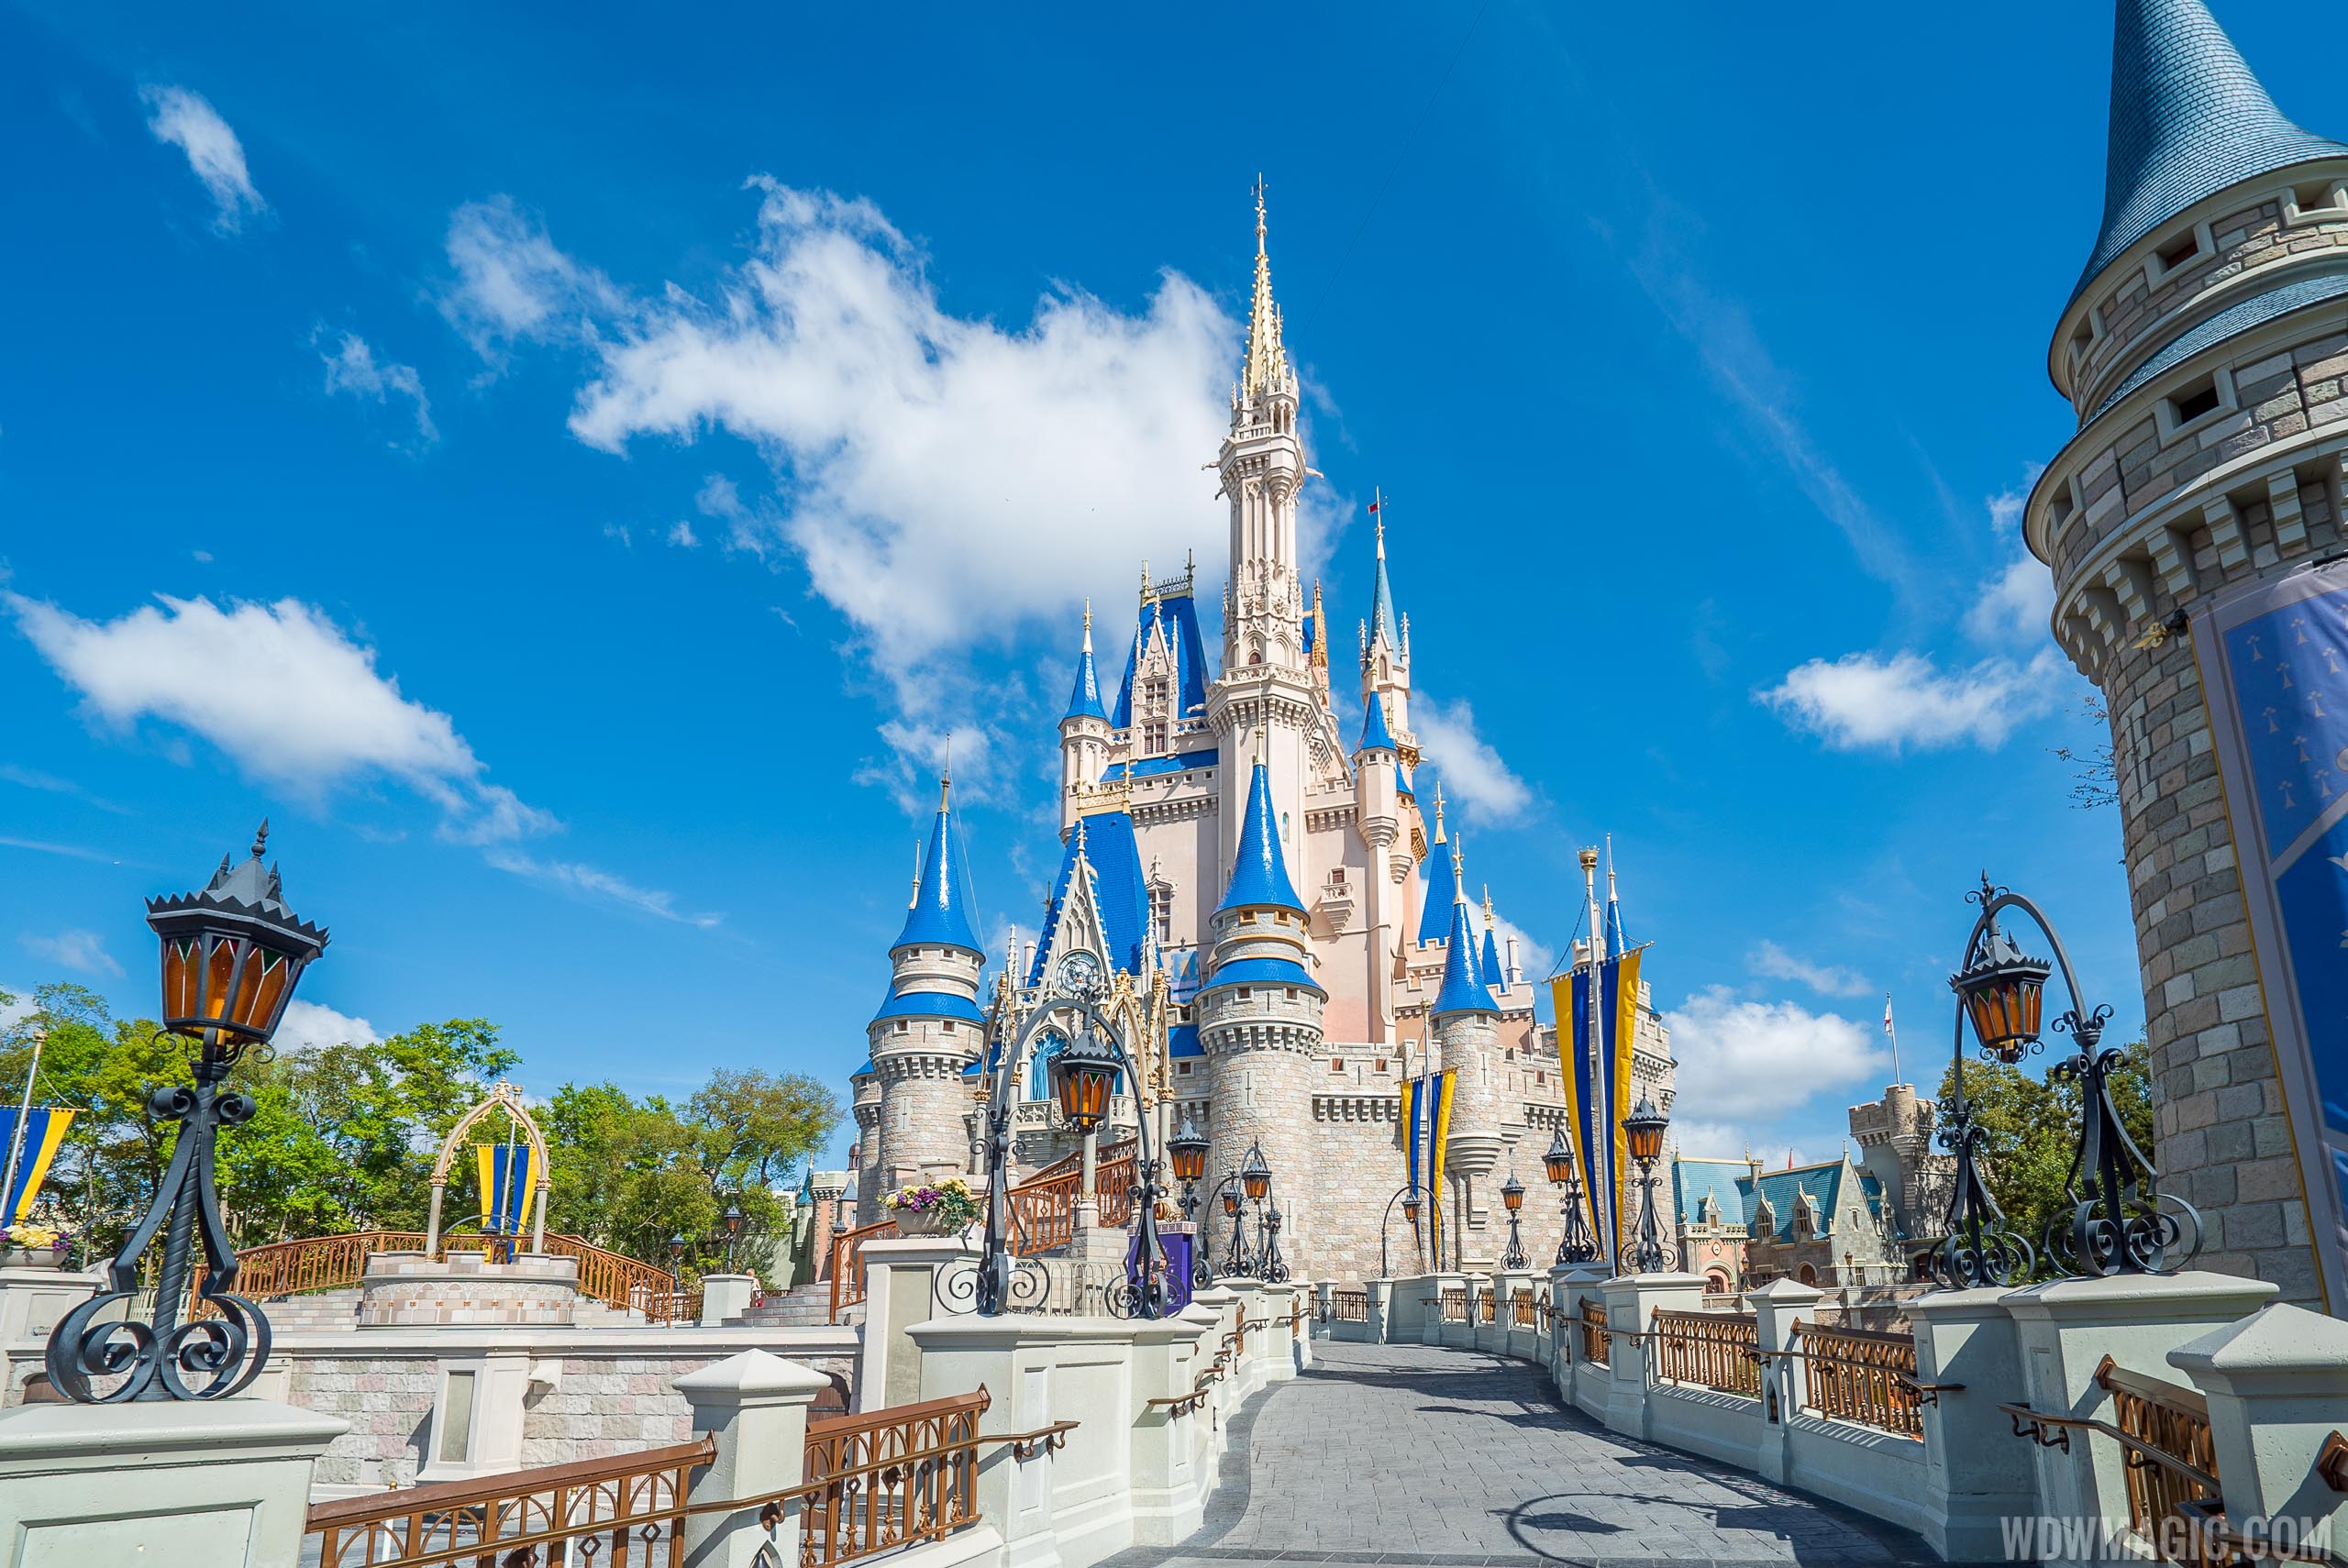 Disney Still To Announce An Extension To Park Closures As Stay At Home Orders Come Into Effect